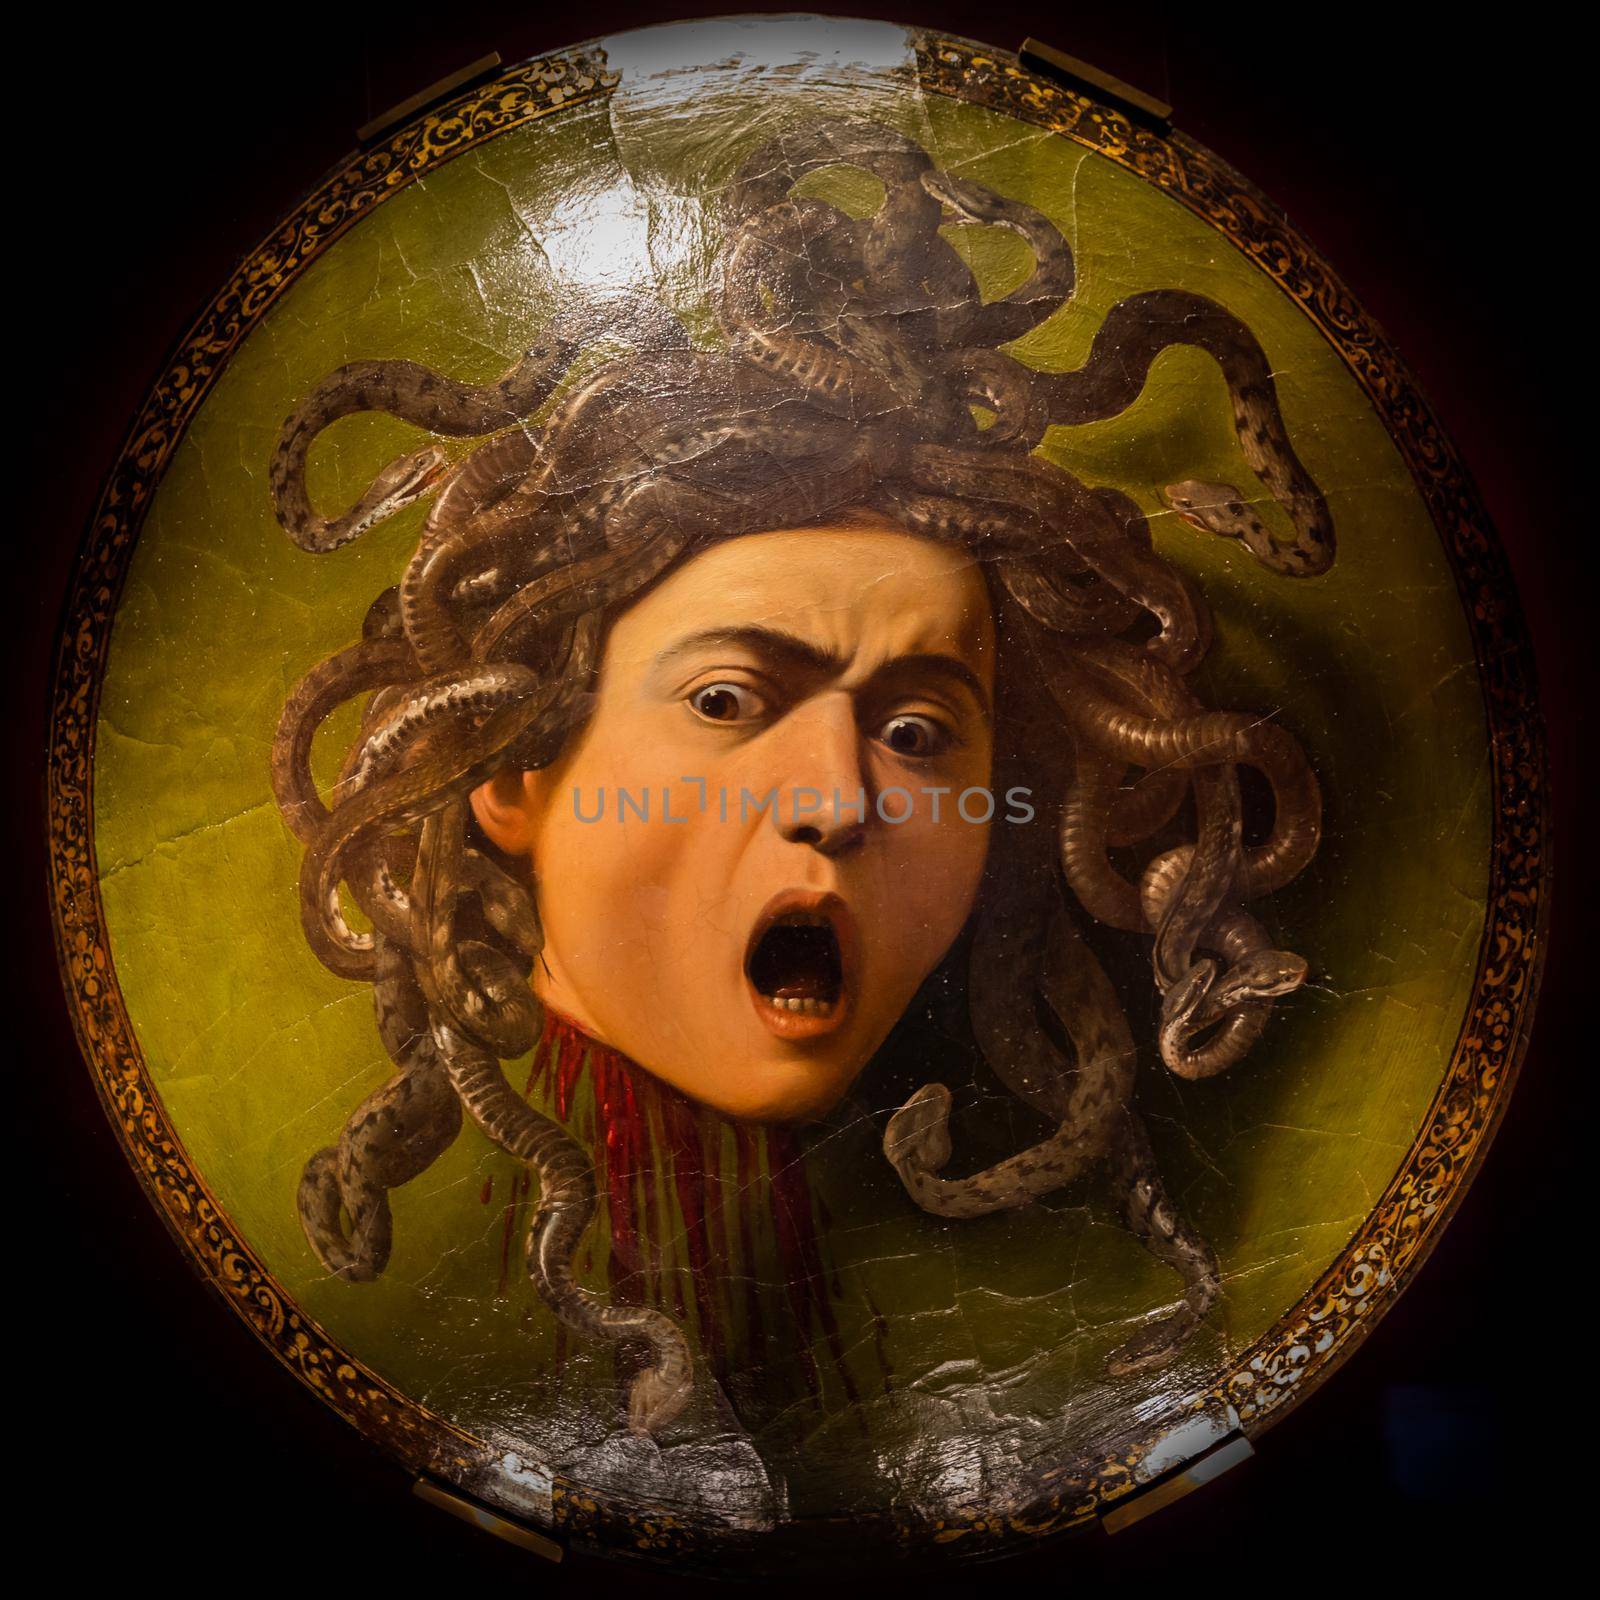 Florence, Italy - Circa August 2021: Medusa by Caravaggio, ca 1598 - oil on canvas